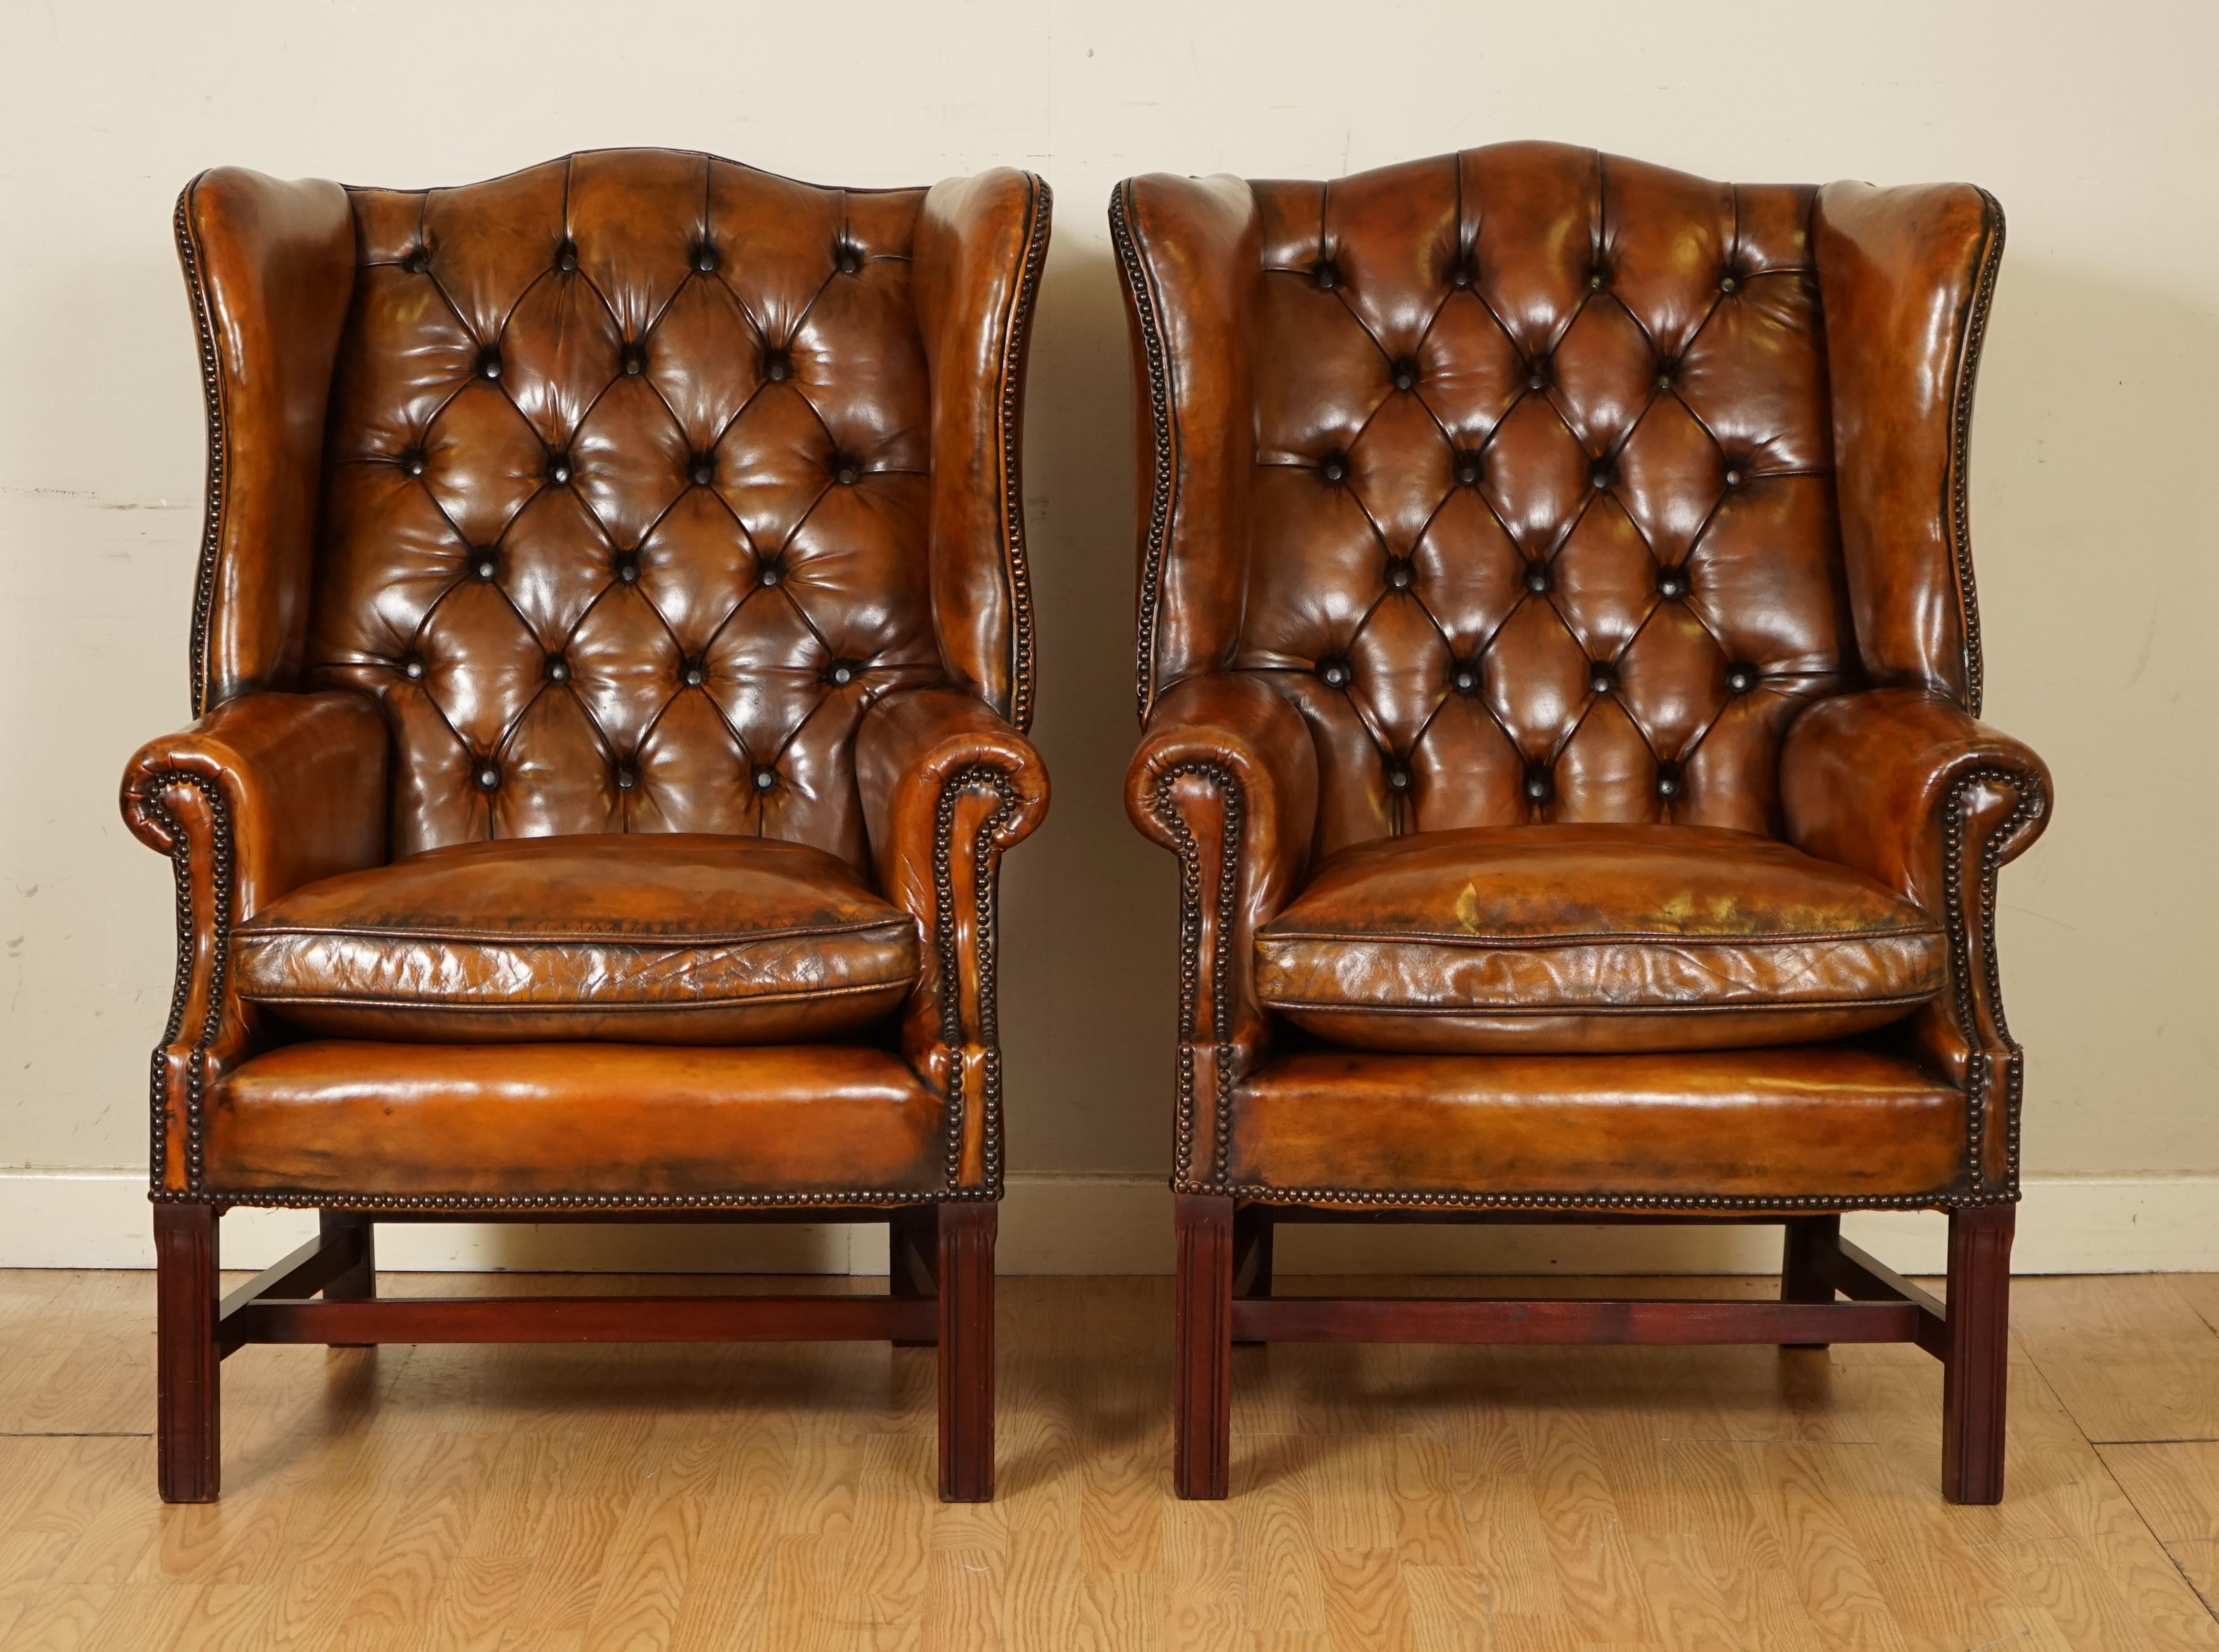 British Pair of Fully Restored Hand Dyed Chesterfield Wingback Chairs with Feather